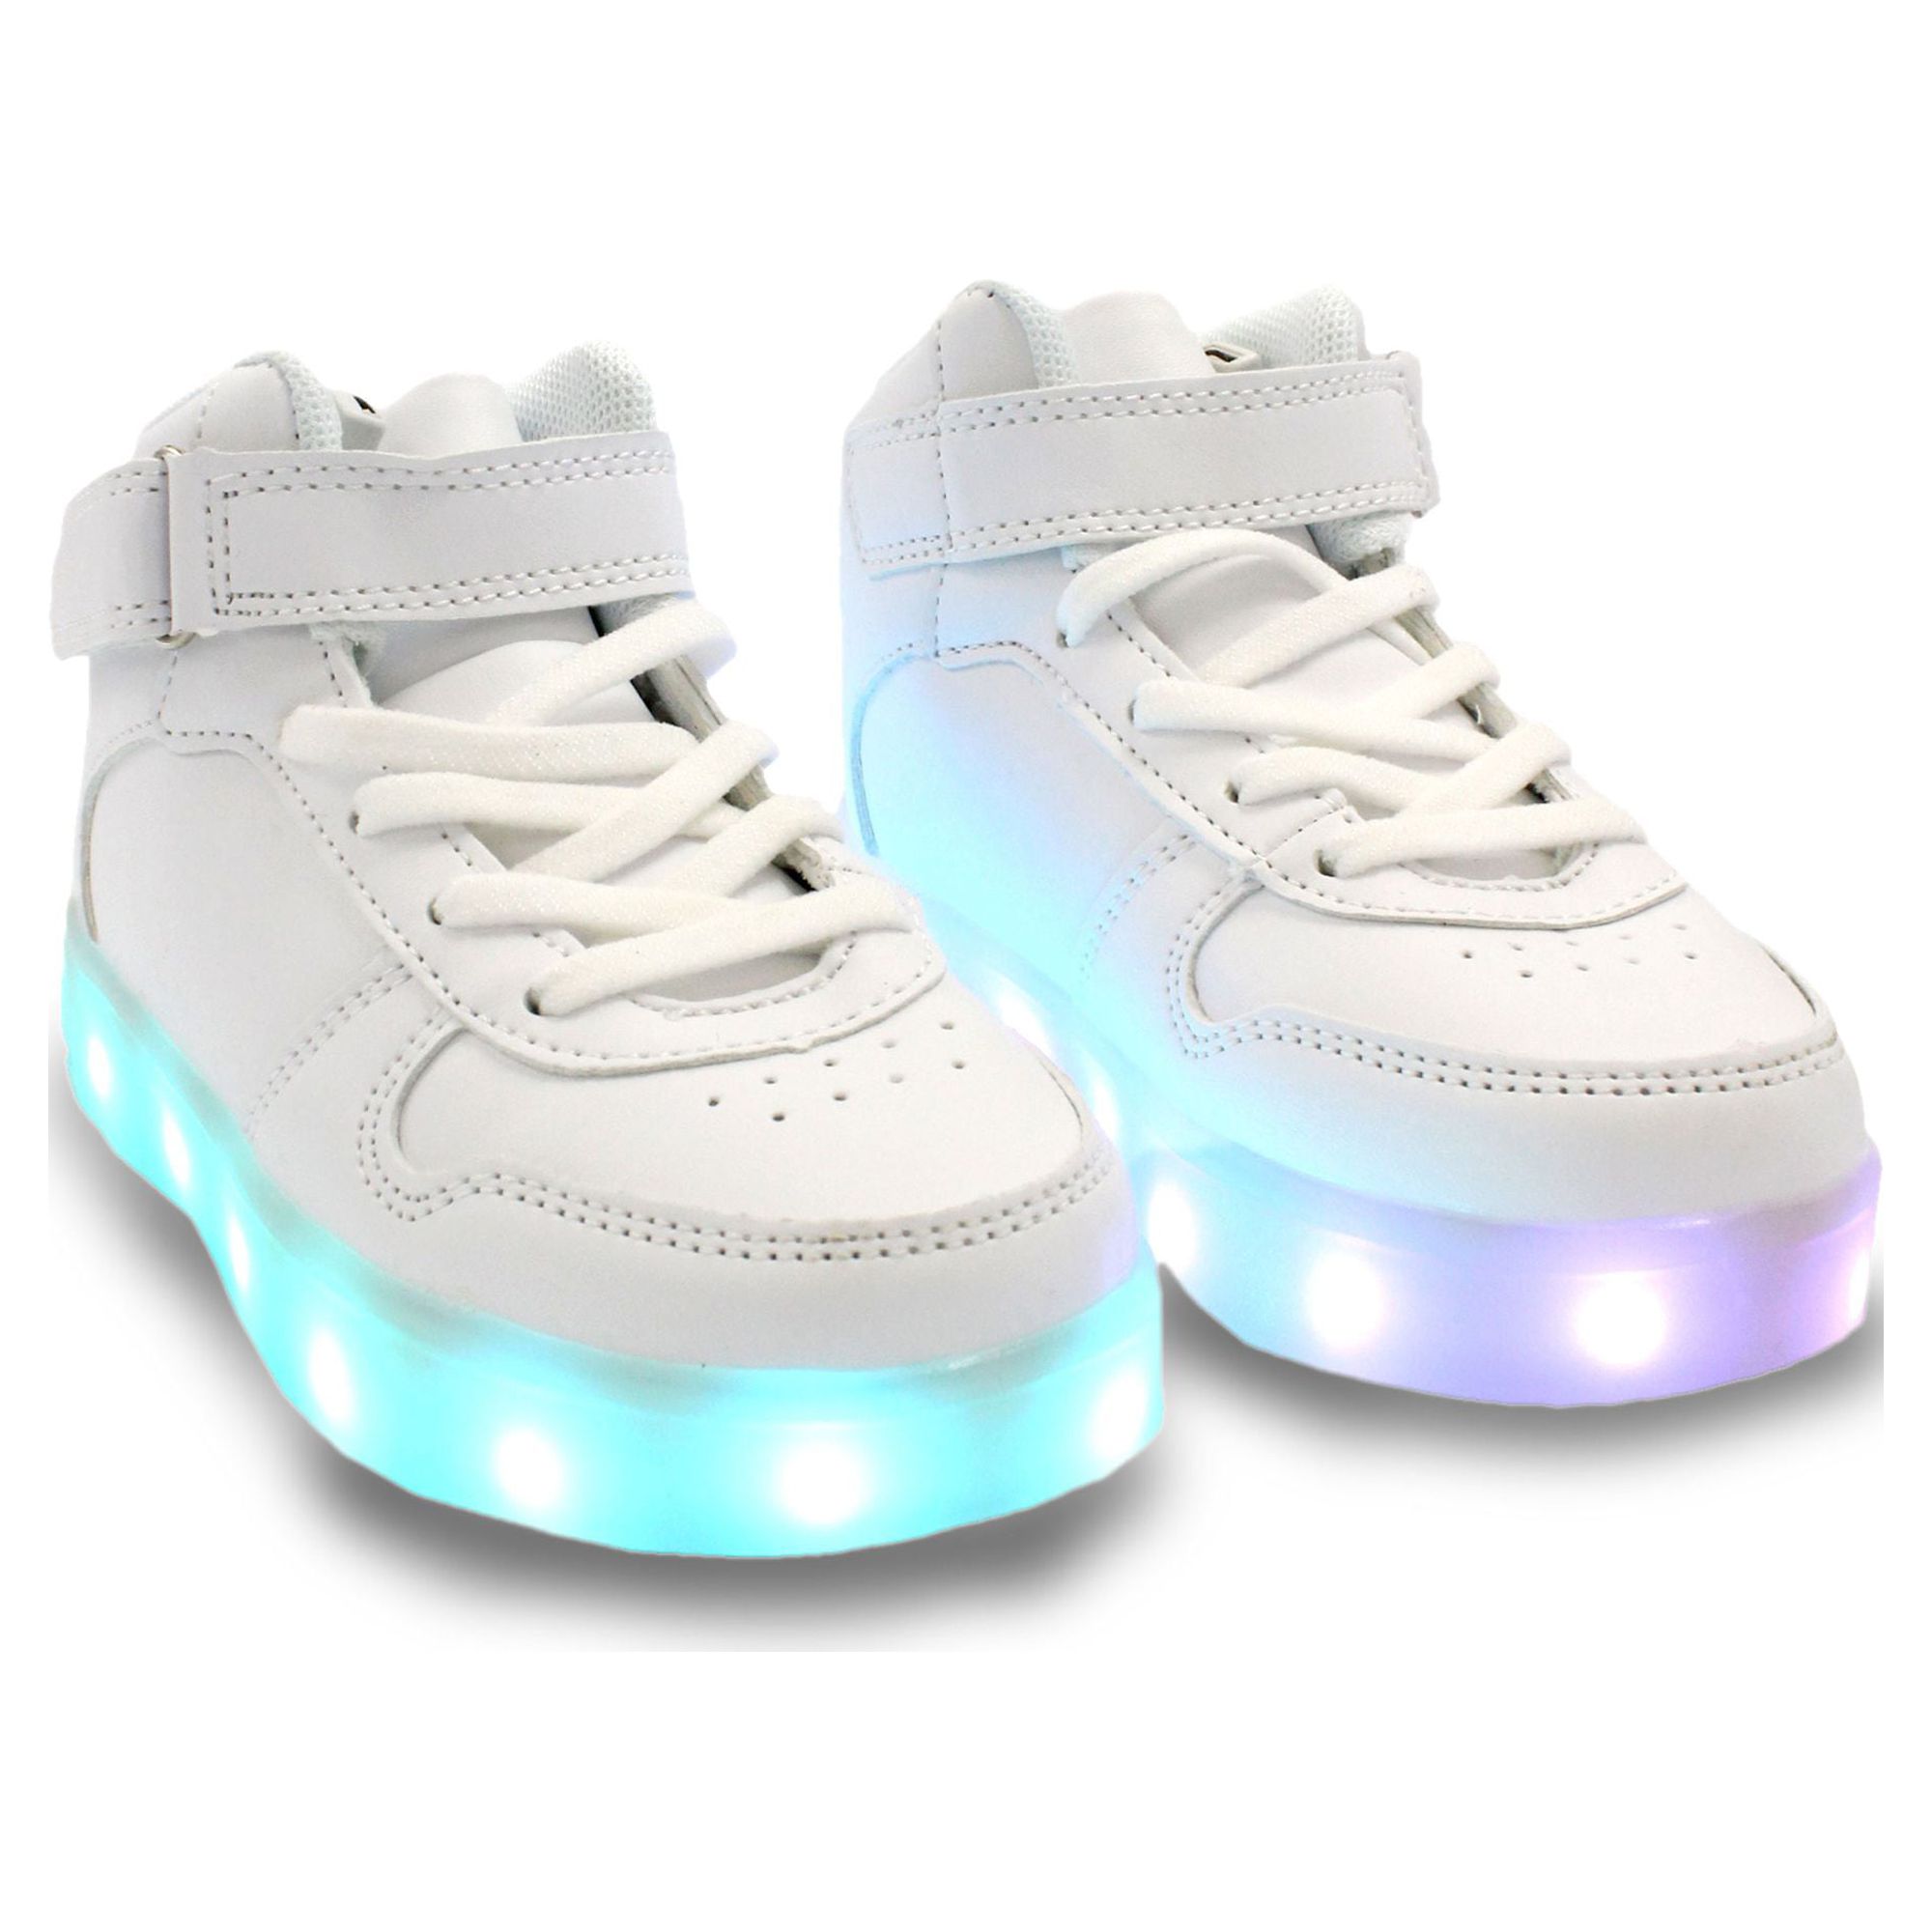 Family Smiles LED Light Up Sneakers Kids High Top Boys Girls Unisex Strap Lace Up Shoes White Toddler US 10.5 / EU 27.5 - image 3 of 7